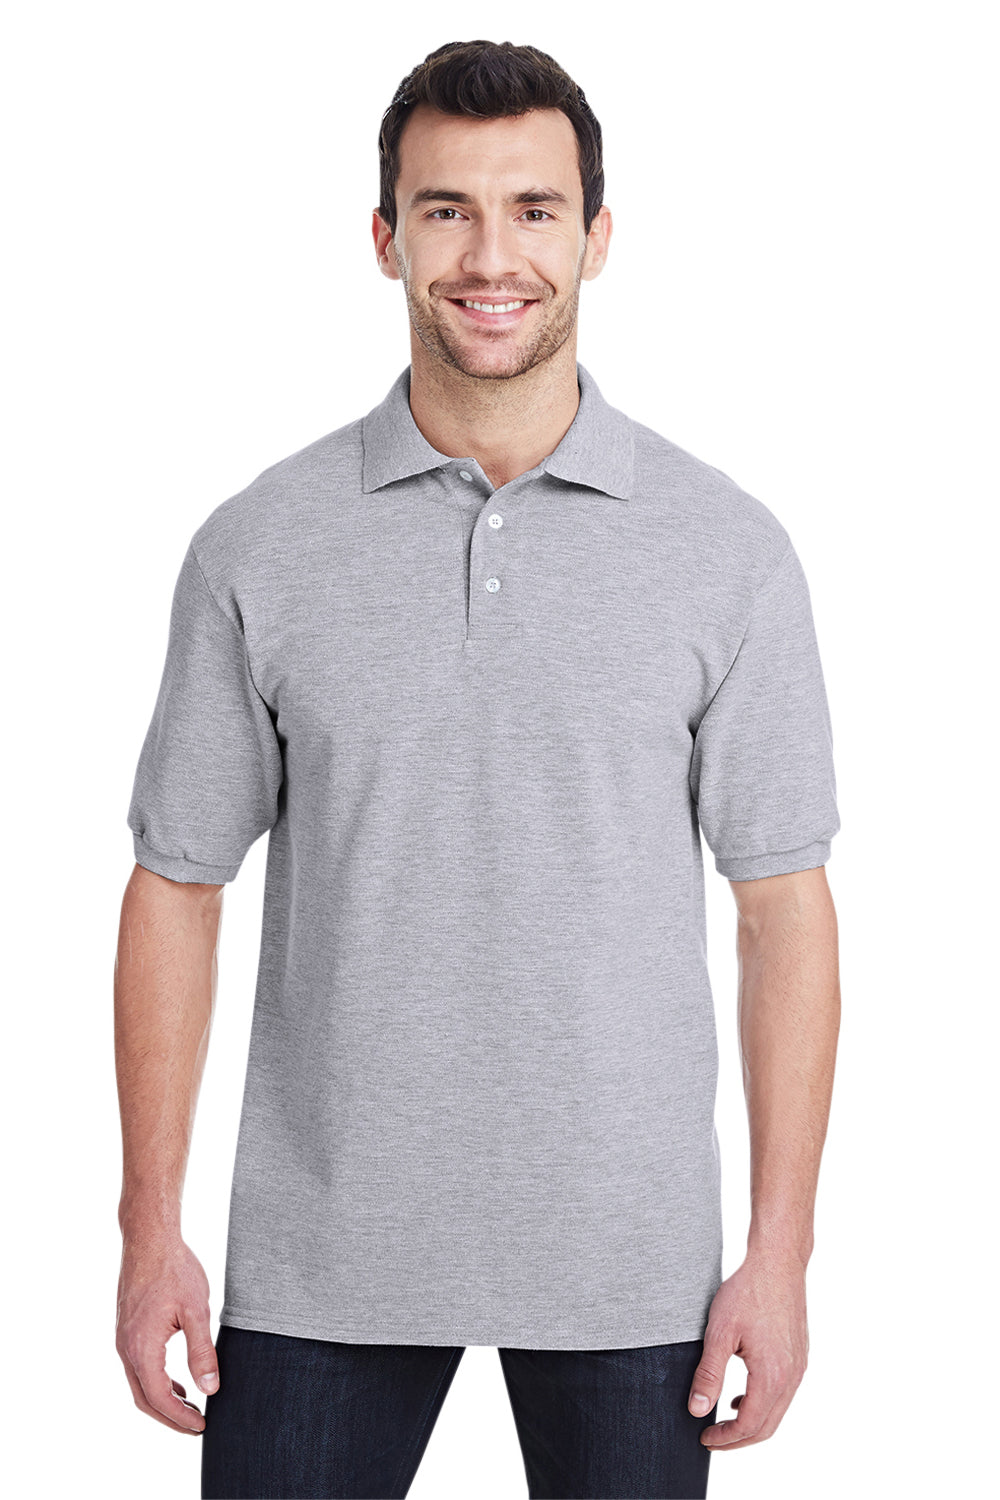 Jerzees 443MR Mens Short Sleeve Polo Shirt Heather Grey Front